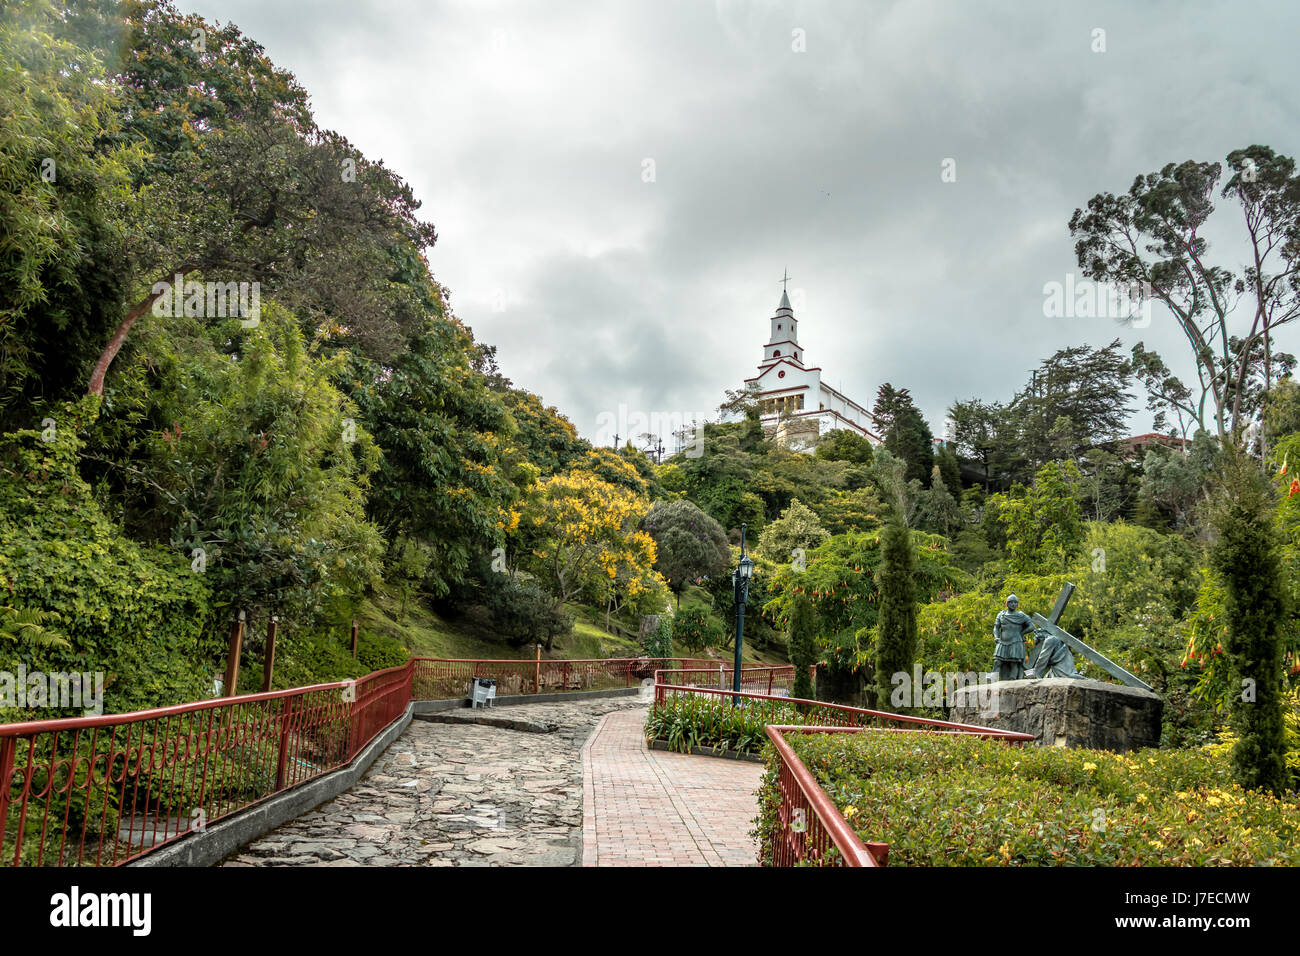 Walkway on top of Monserrate Hill with Monserrate Church on background - Bogota, Colombia Stock Photo